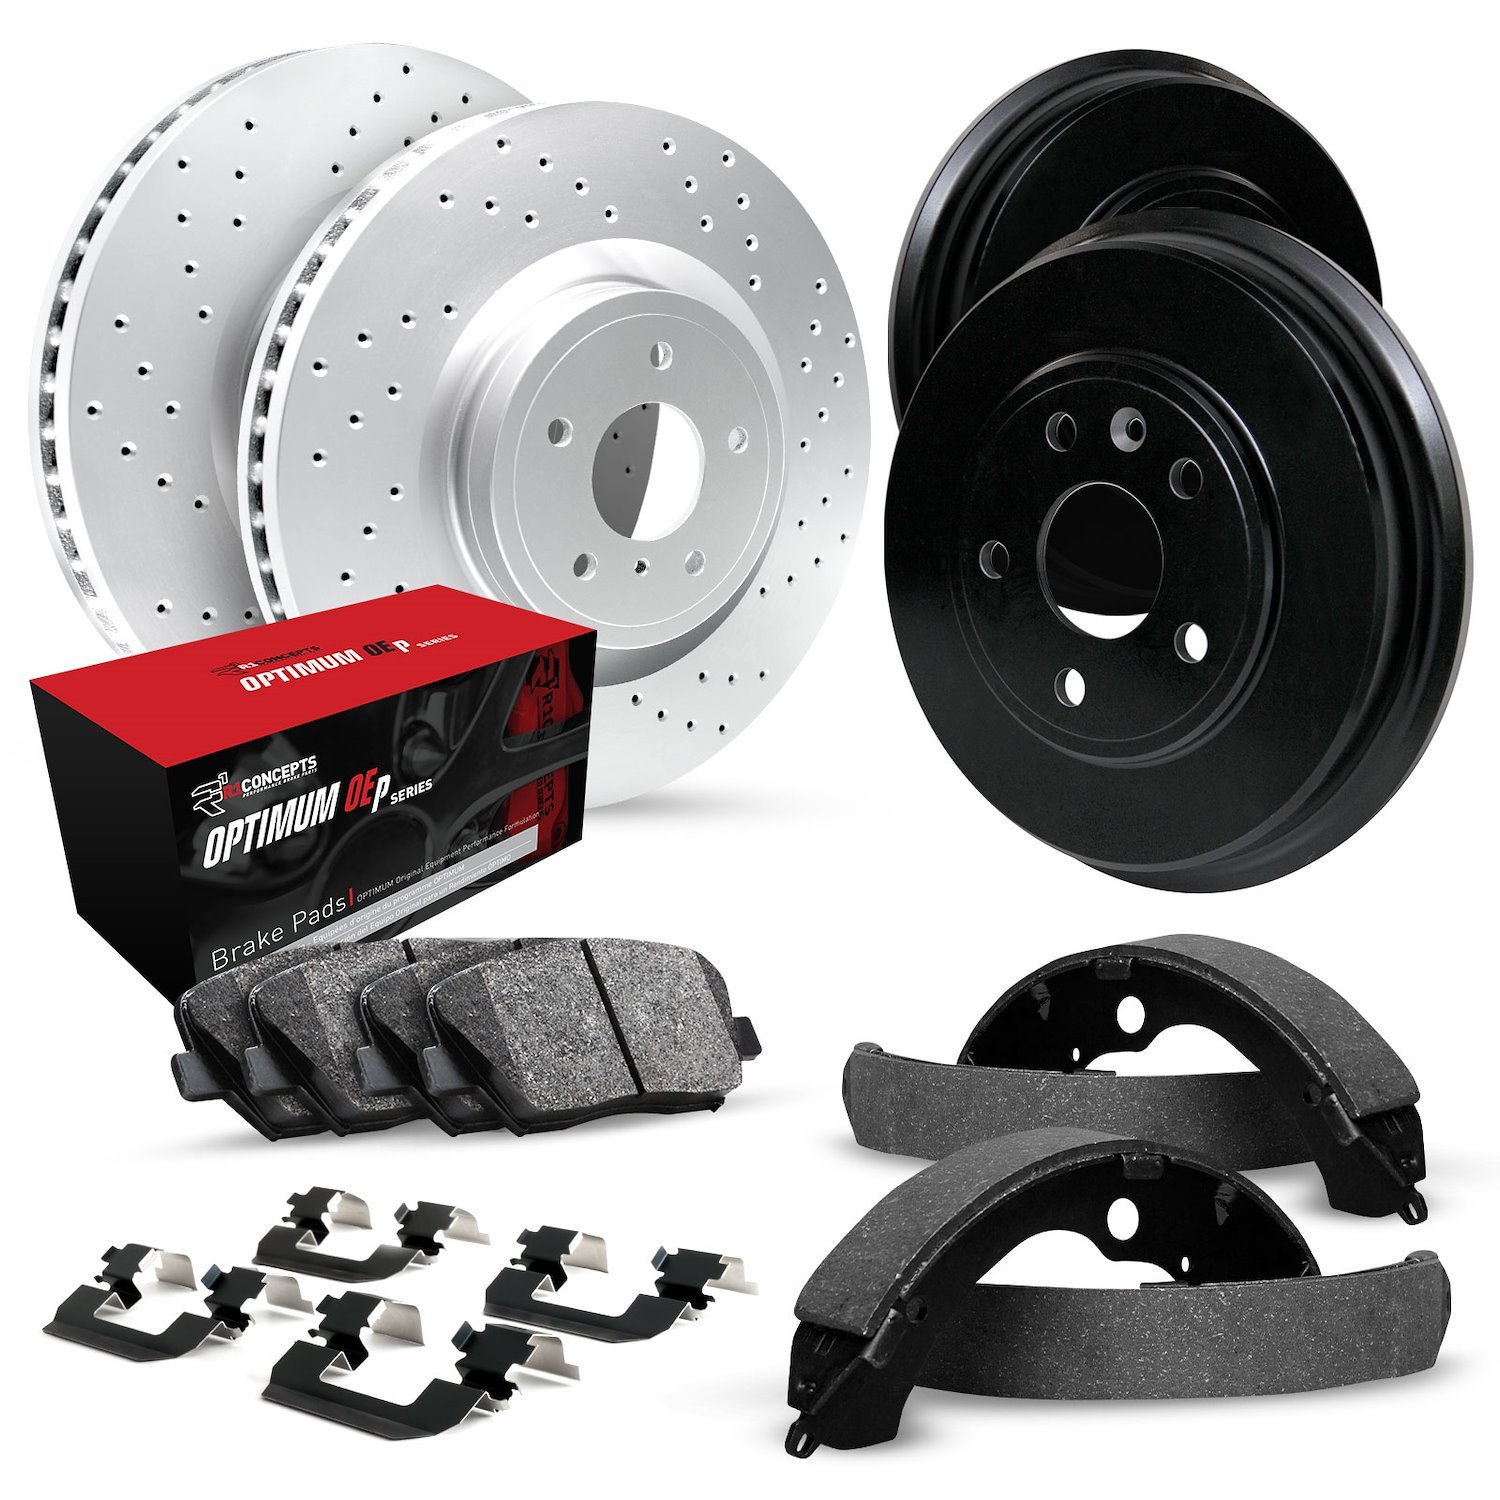 GEO-Carbon Drilled Brake Rotor & Drum Set w/Optimum OE Pads, Shoes, & Hardware, 1969-1974 GM, Position: Front & Rear